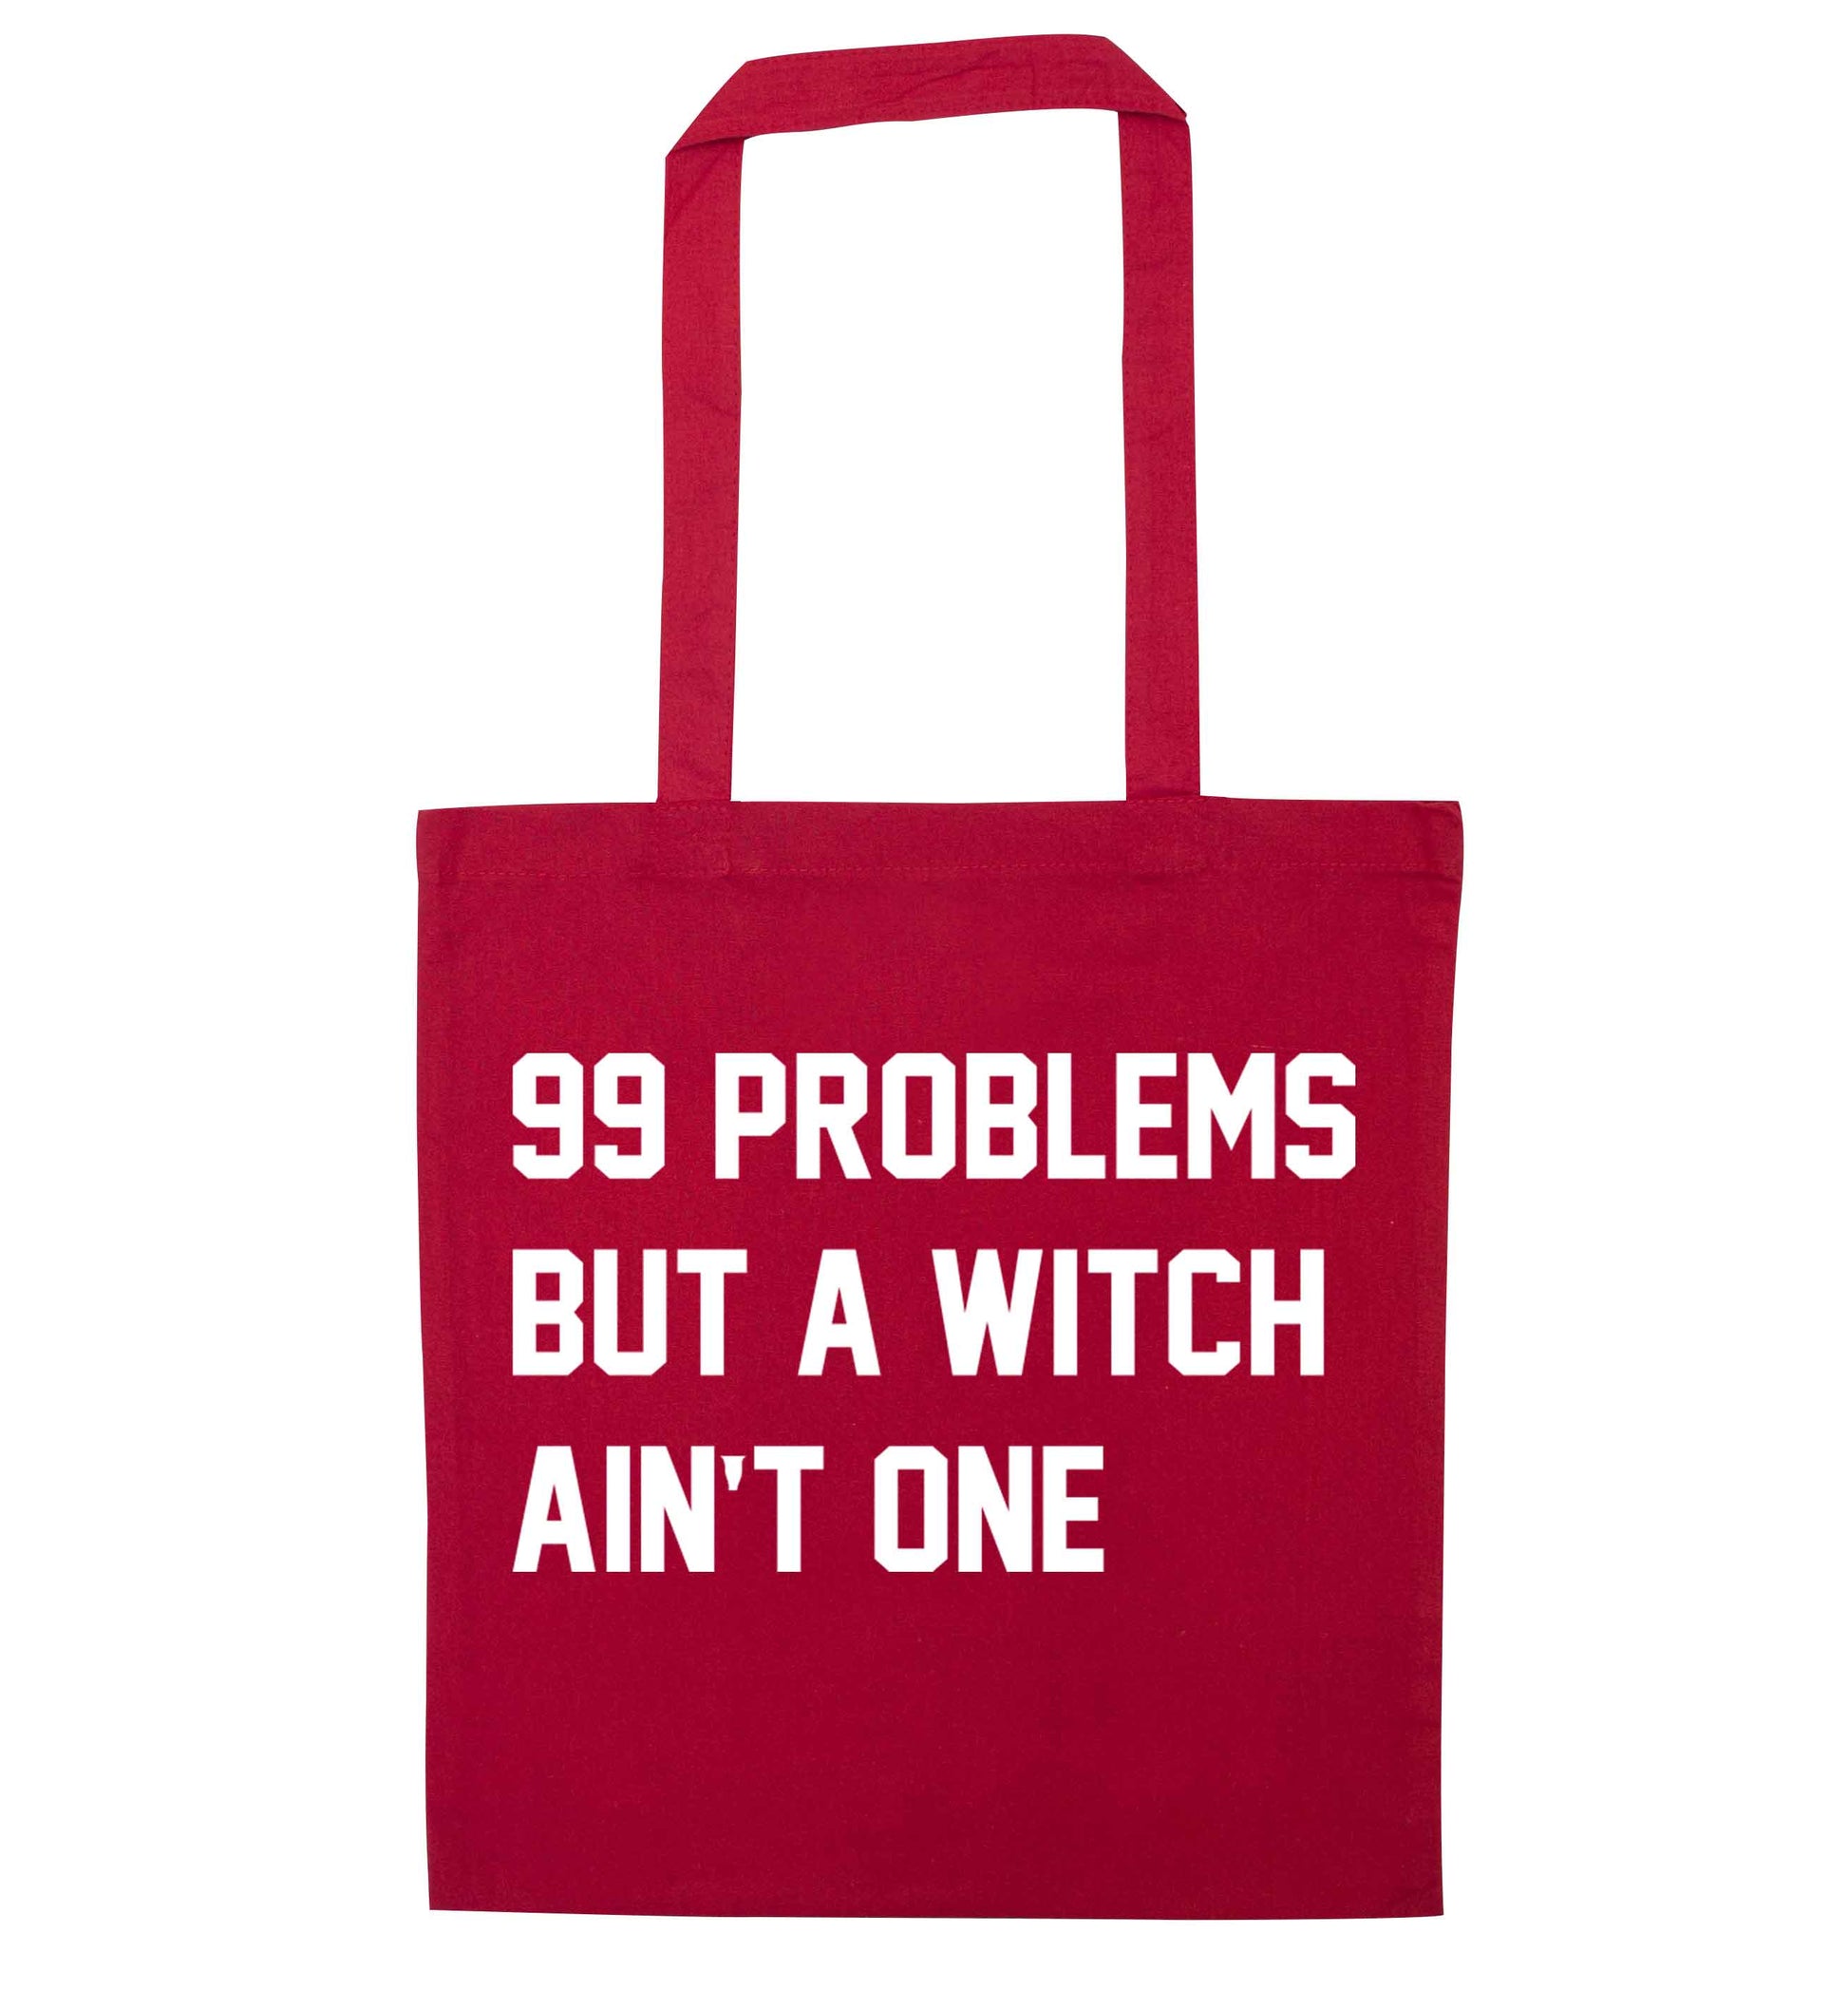 99 Problems but a witch aint one red tote bag